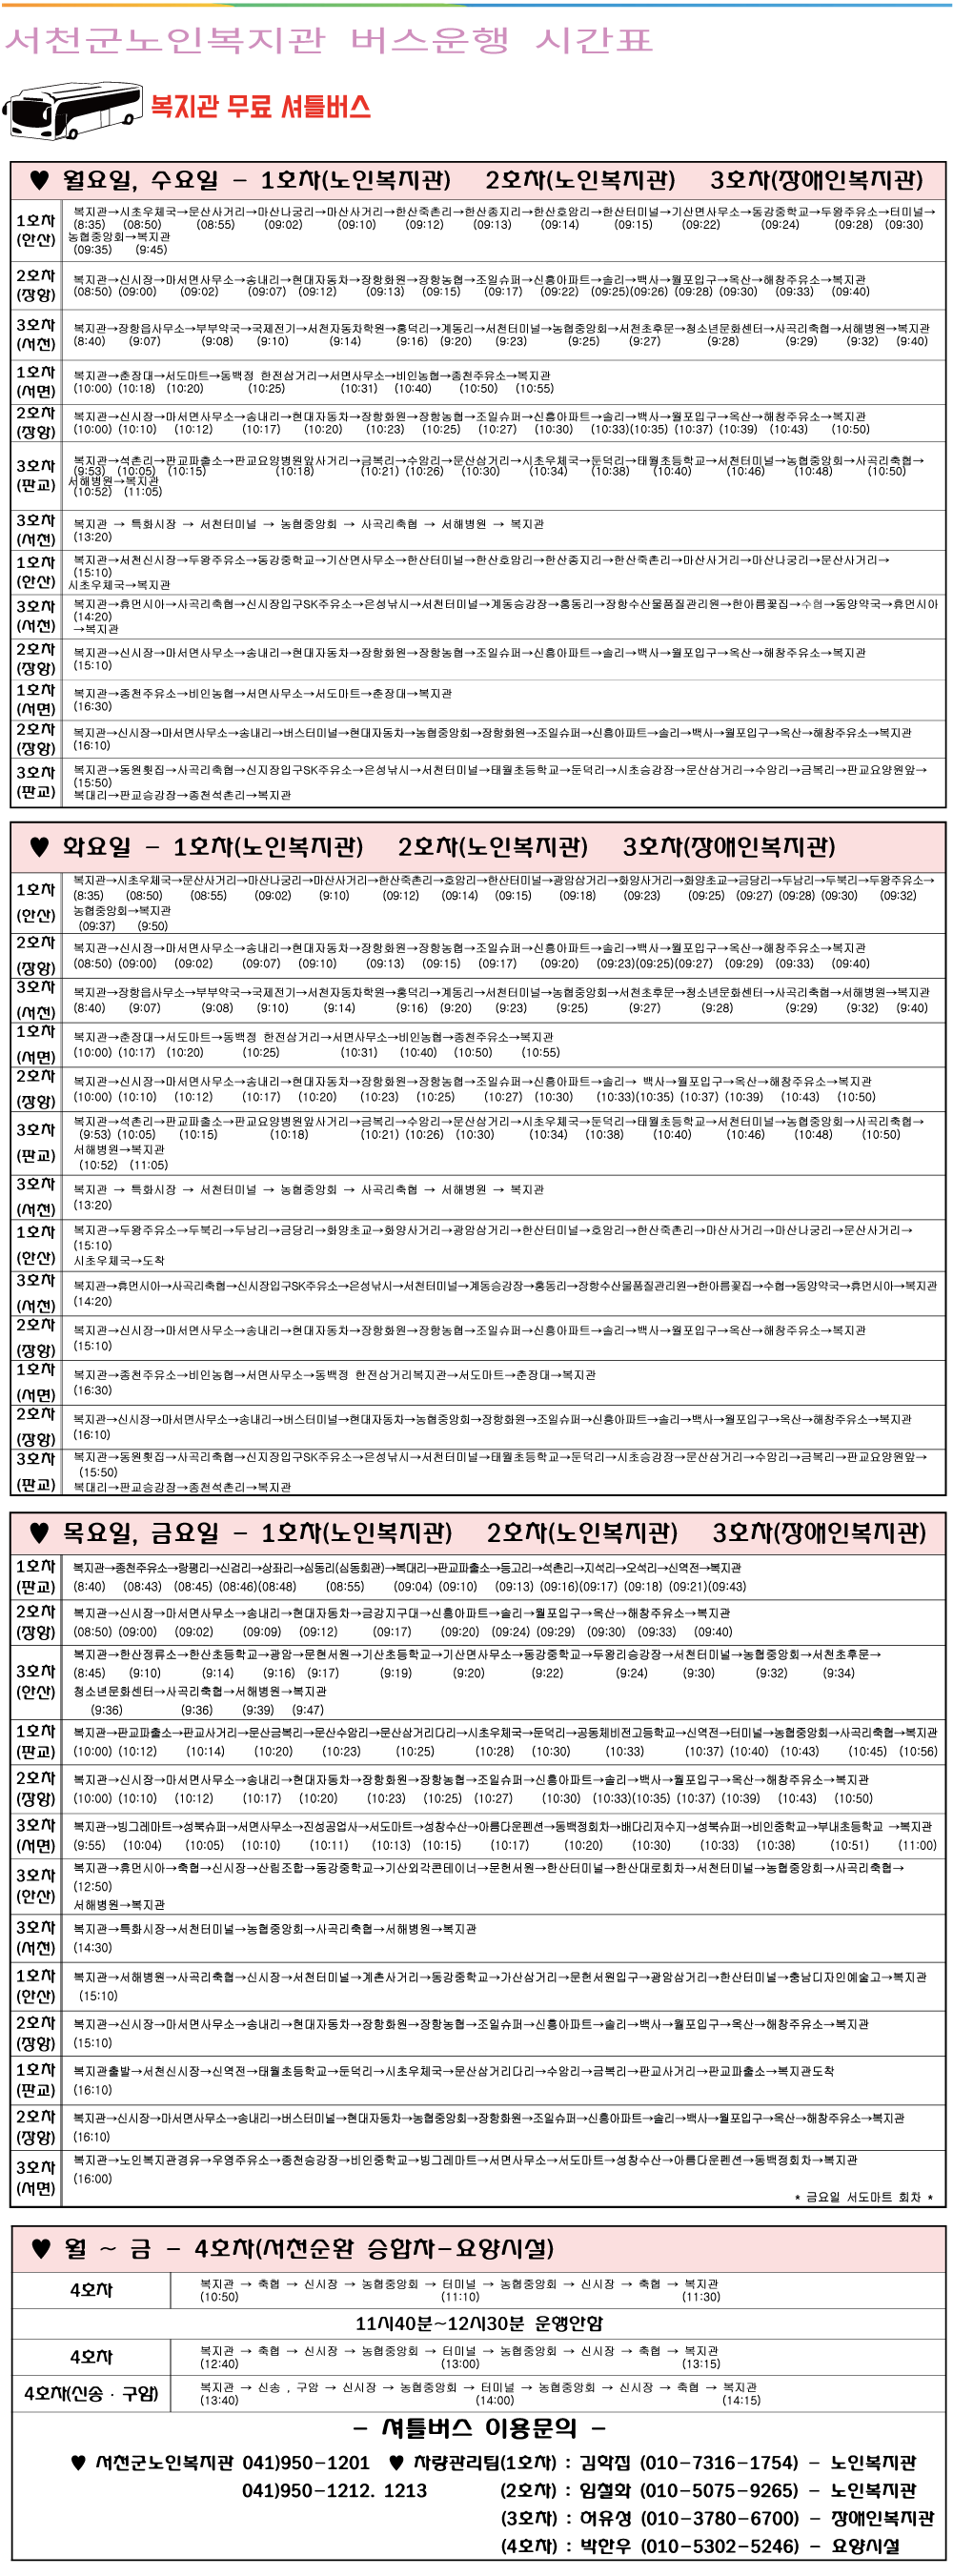 http://www.scnoin.or.kr/bs/userimg/fileu/1698900980_차량운행정상운행.png